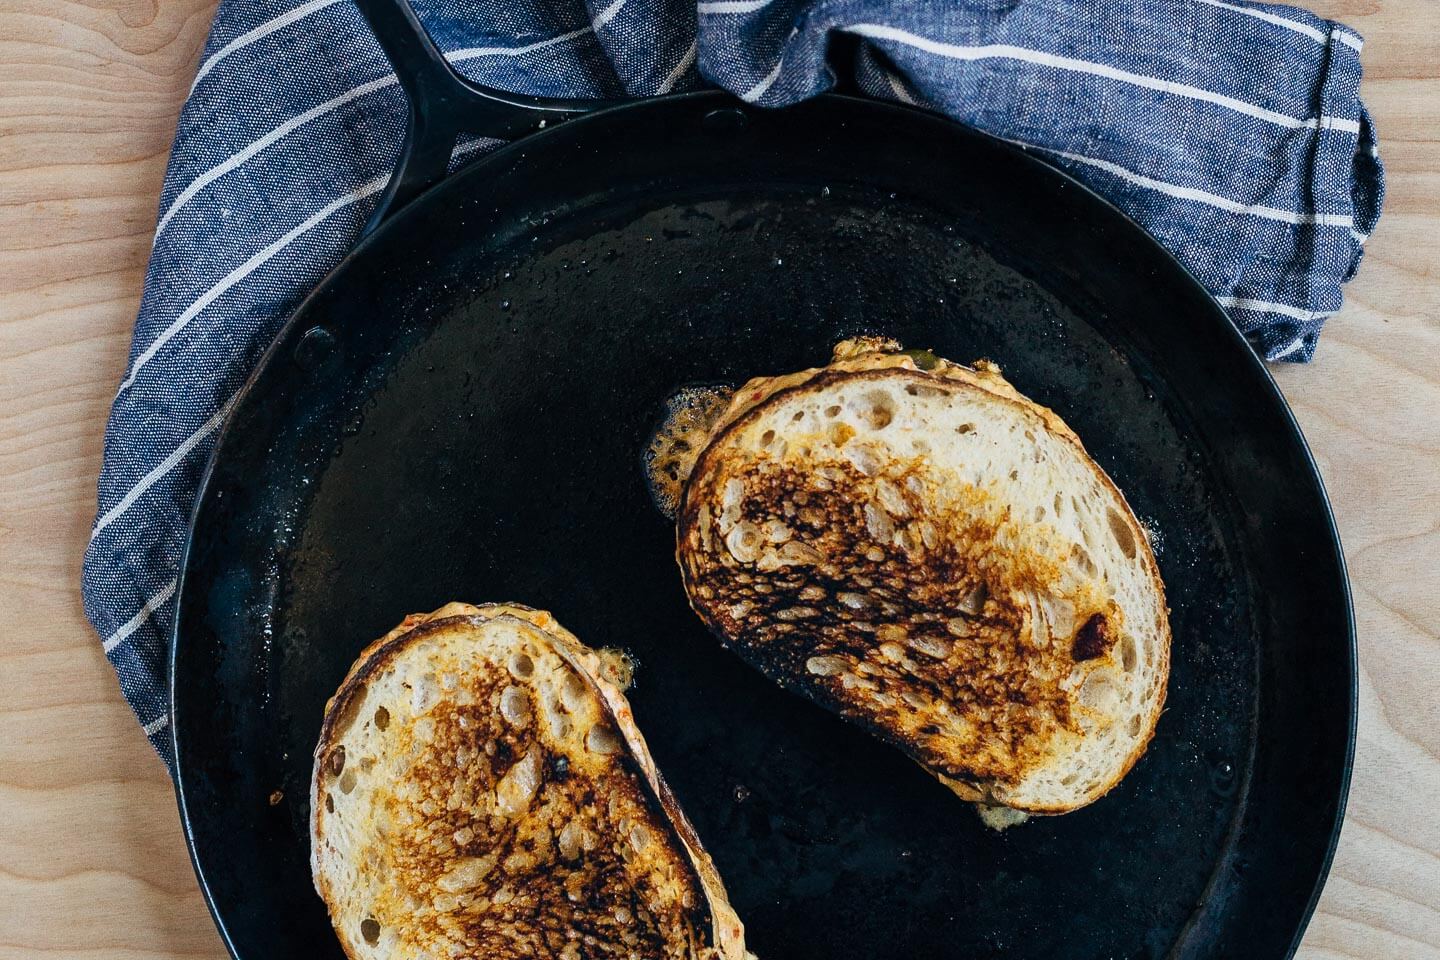 Delightfully gooey and rich grilled pimento cheese sandwiches.